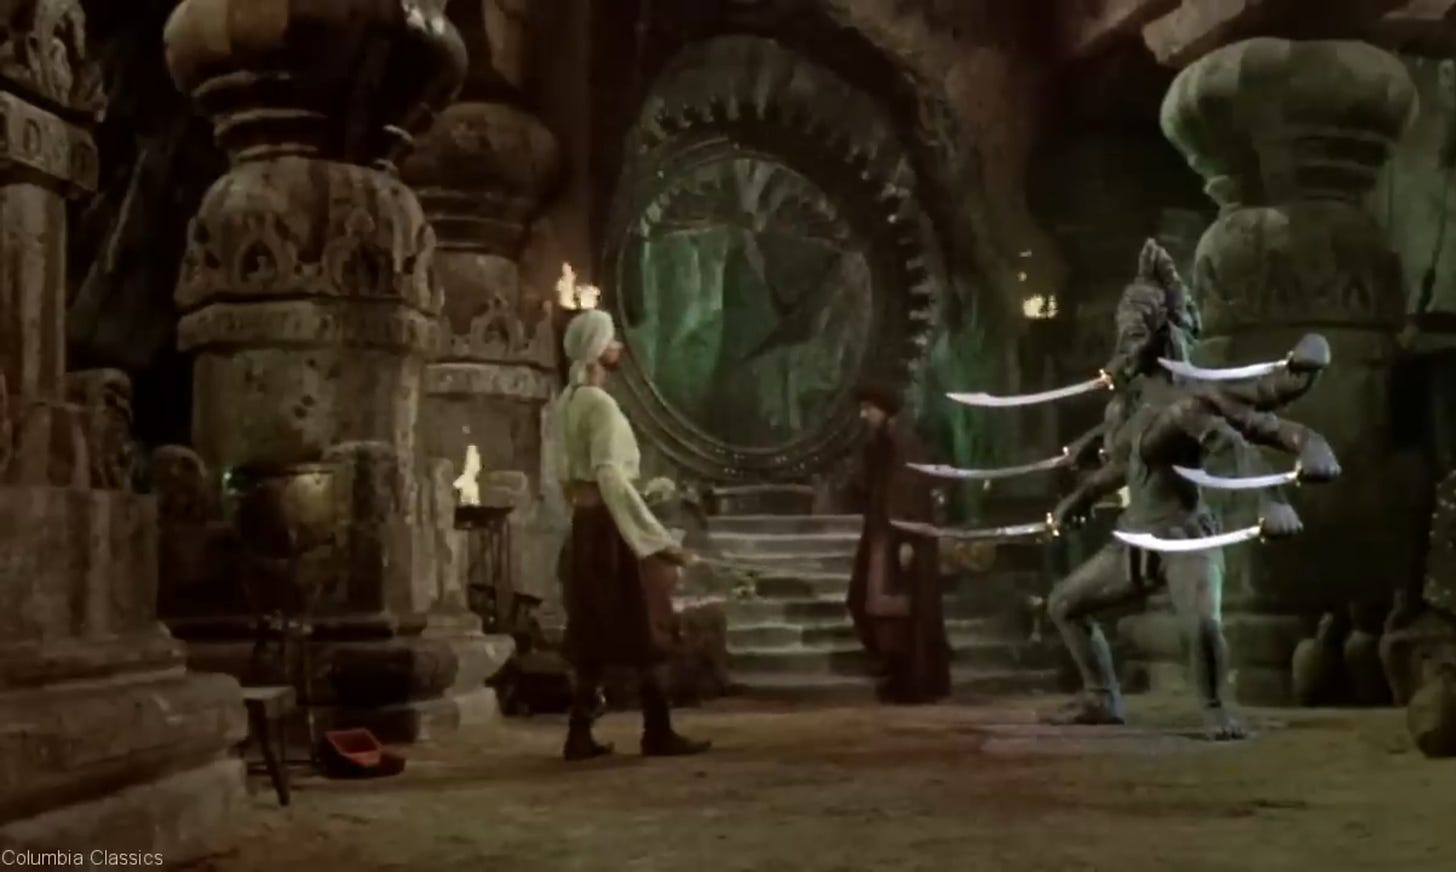 Sinbad is about to fight the statue of six-armed Kali.